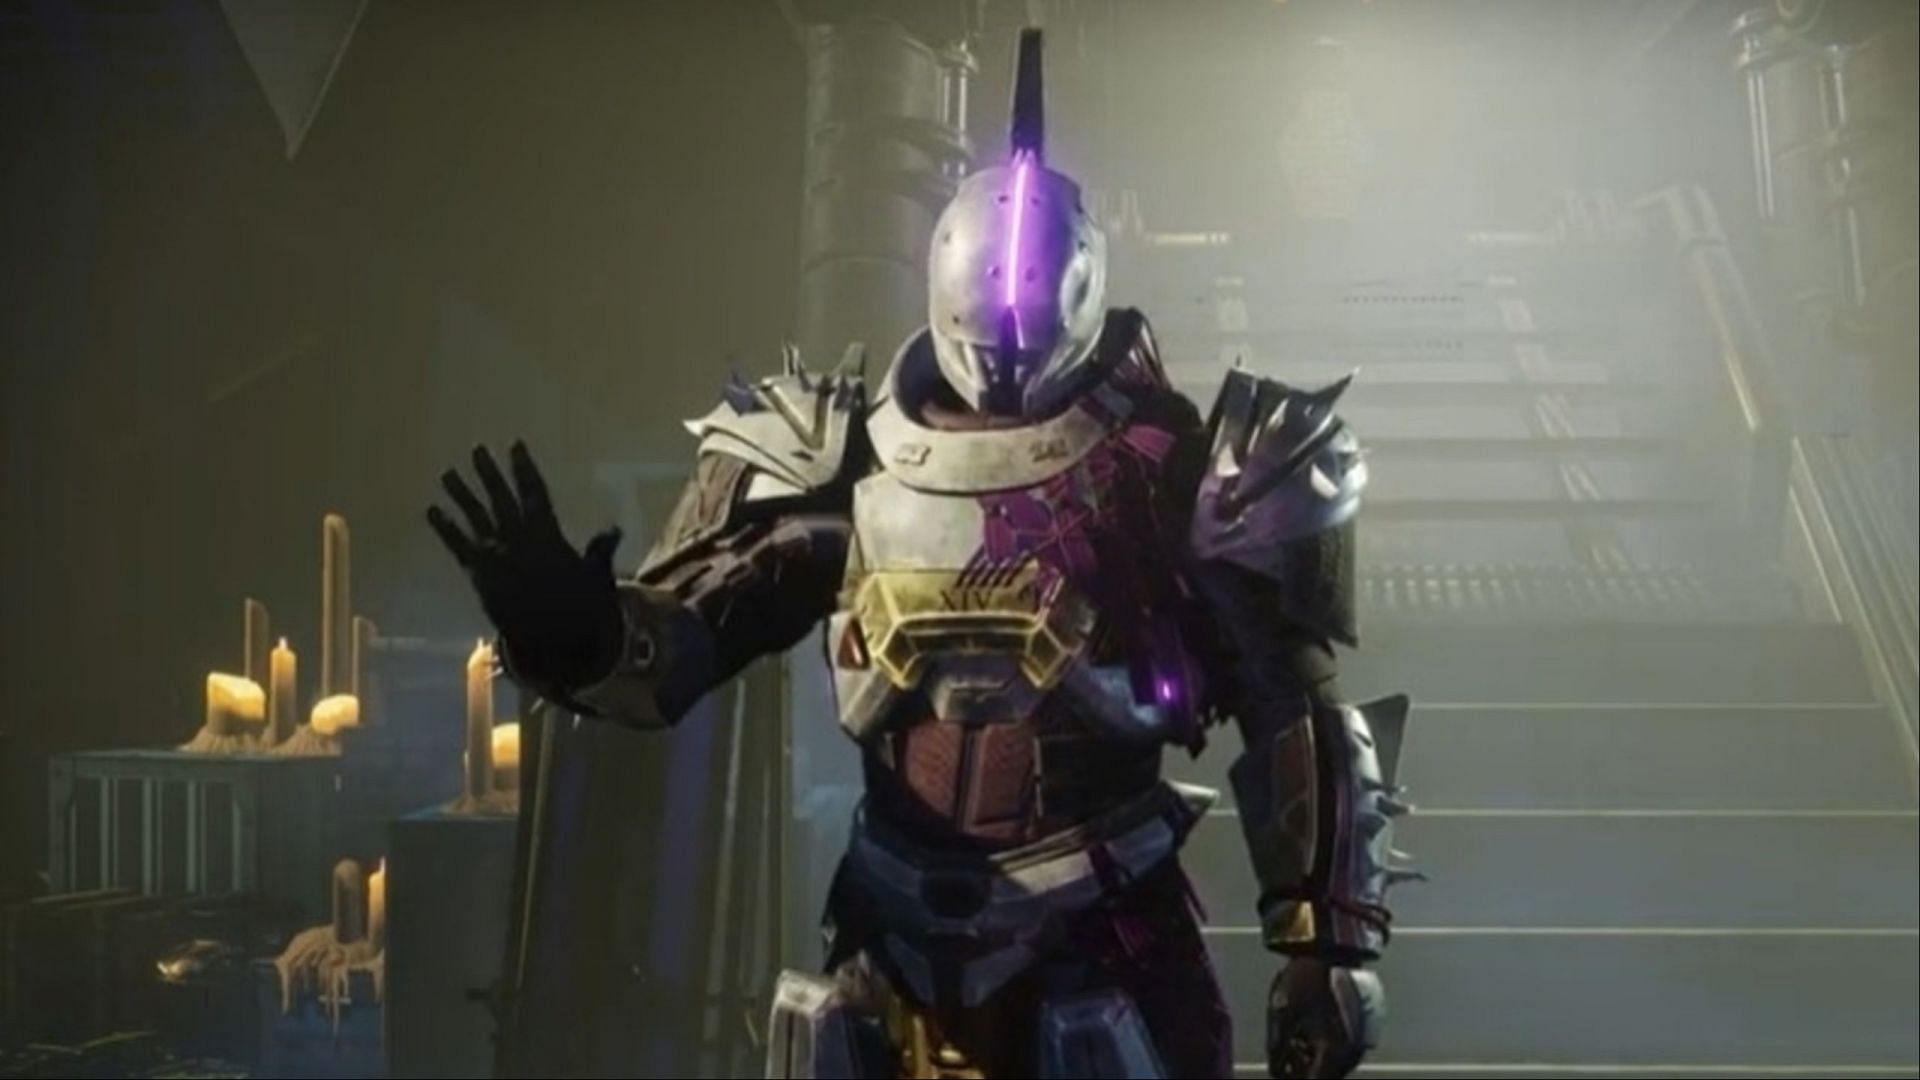 Saint-14 at the Tower in Destiny 2 (Image via Bungie) 